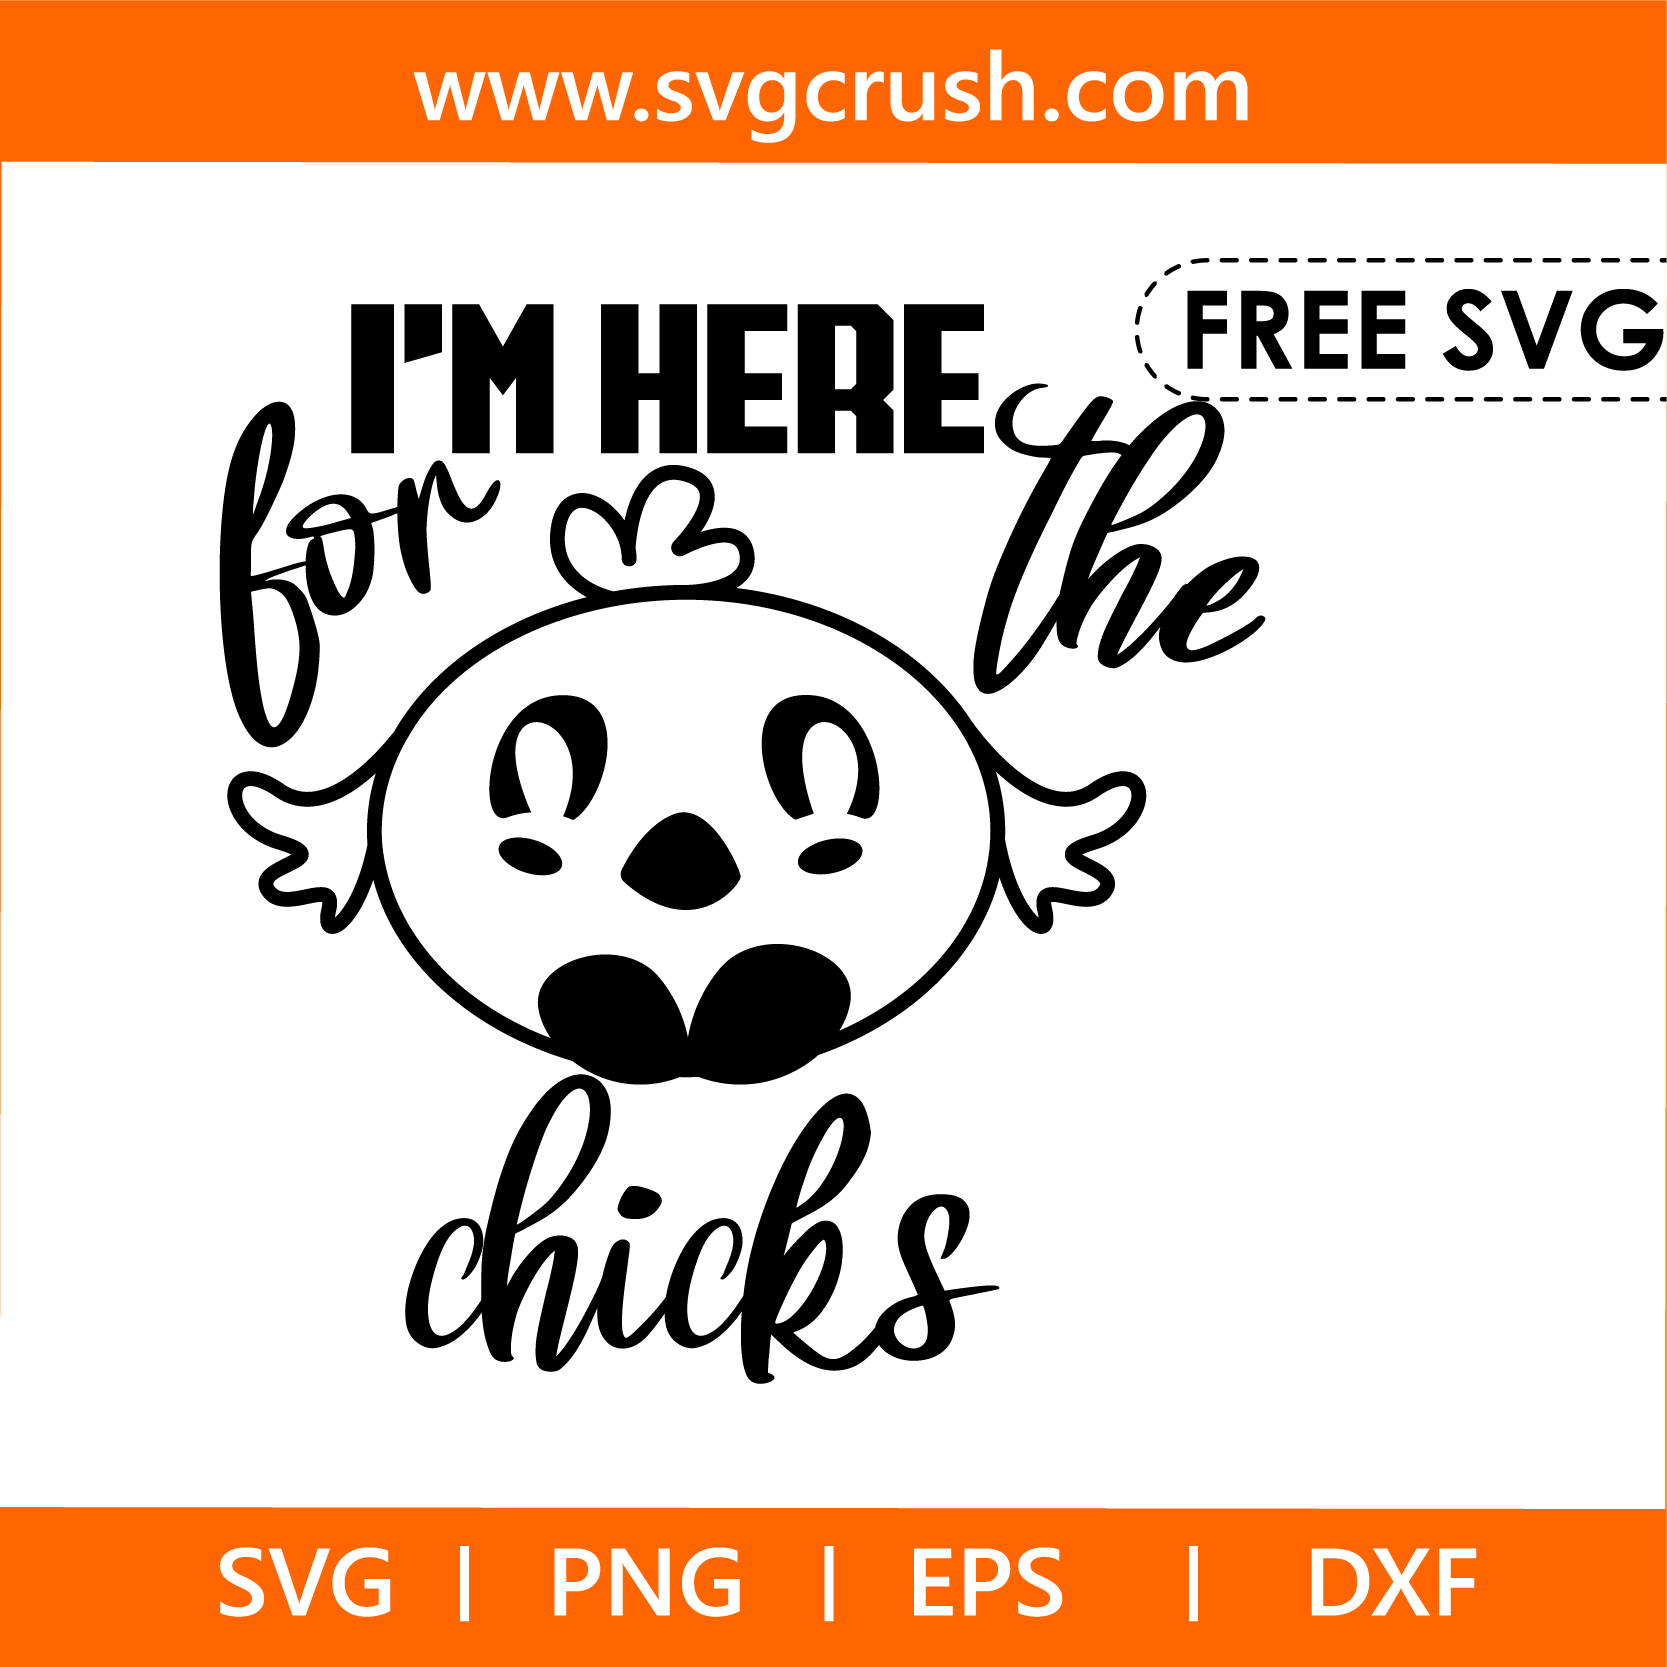 free im-here-for-the-chicks-005 svg